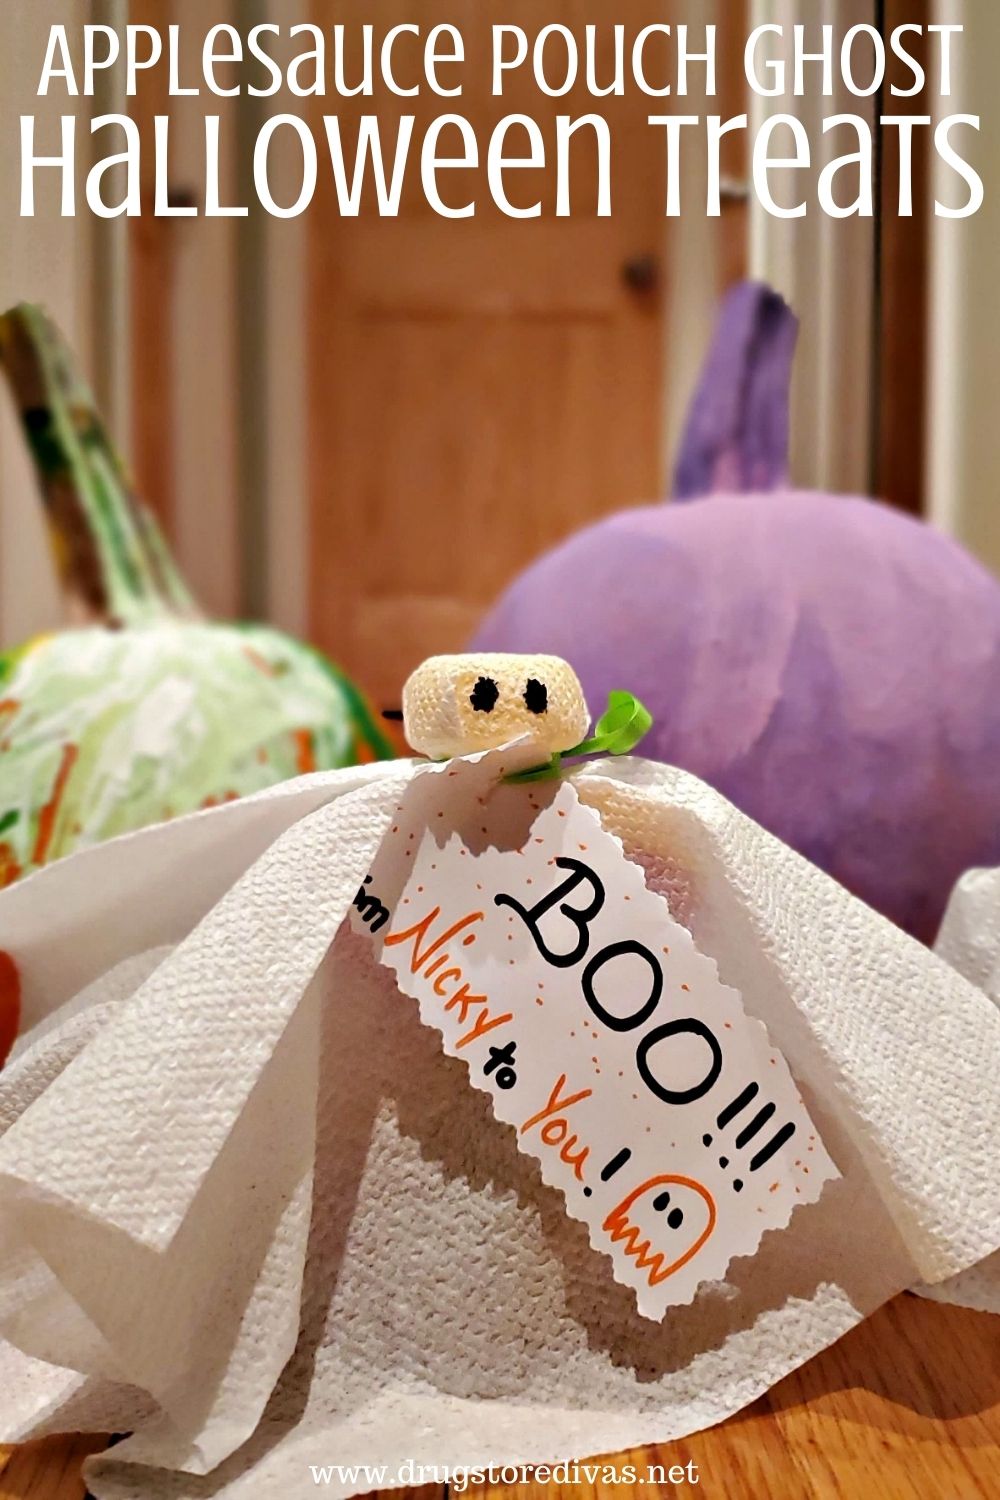 White napkin shaped like a ghost with a tag that reads "Boo!!! From Nicky to You!" in front of two painted pumpkins.